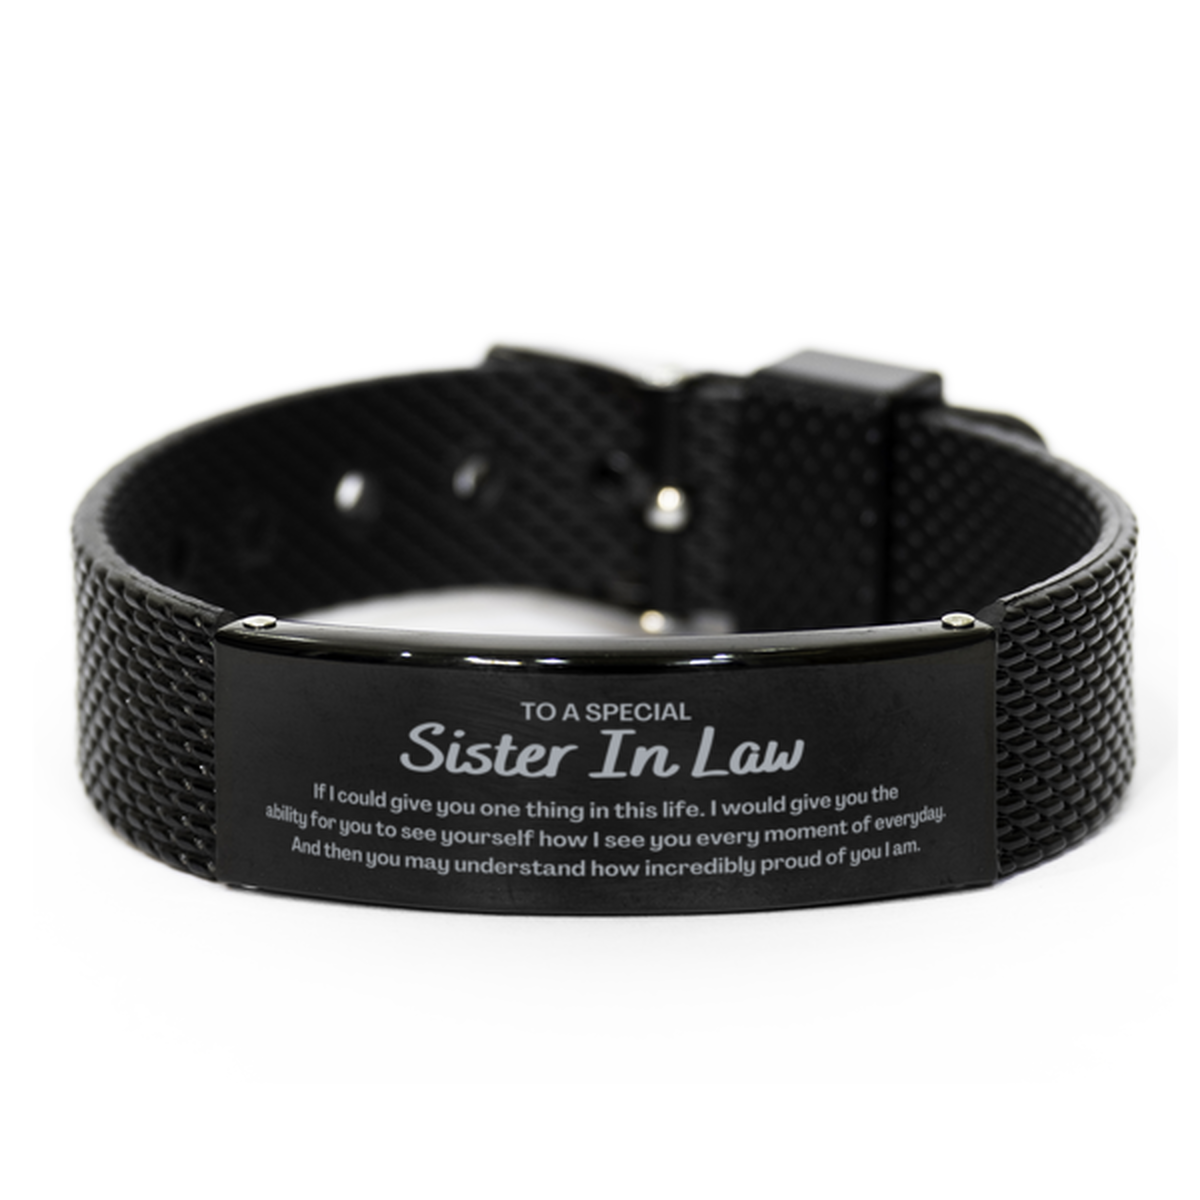 To My Sister In Law Black Shark Mesh Bracelet, Gifts For Sister In Law Engraved, Inspirational Gifts for Christmas Birthday, Epic Gifts for Sister In Law To A Special Sister In Law how incredibly proud of you I am